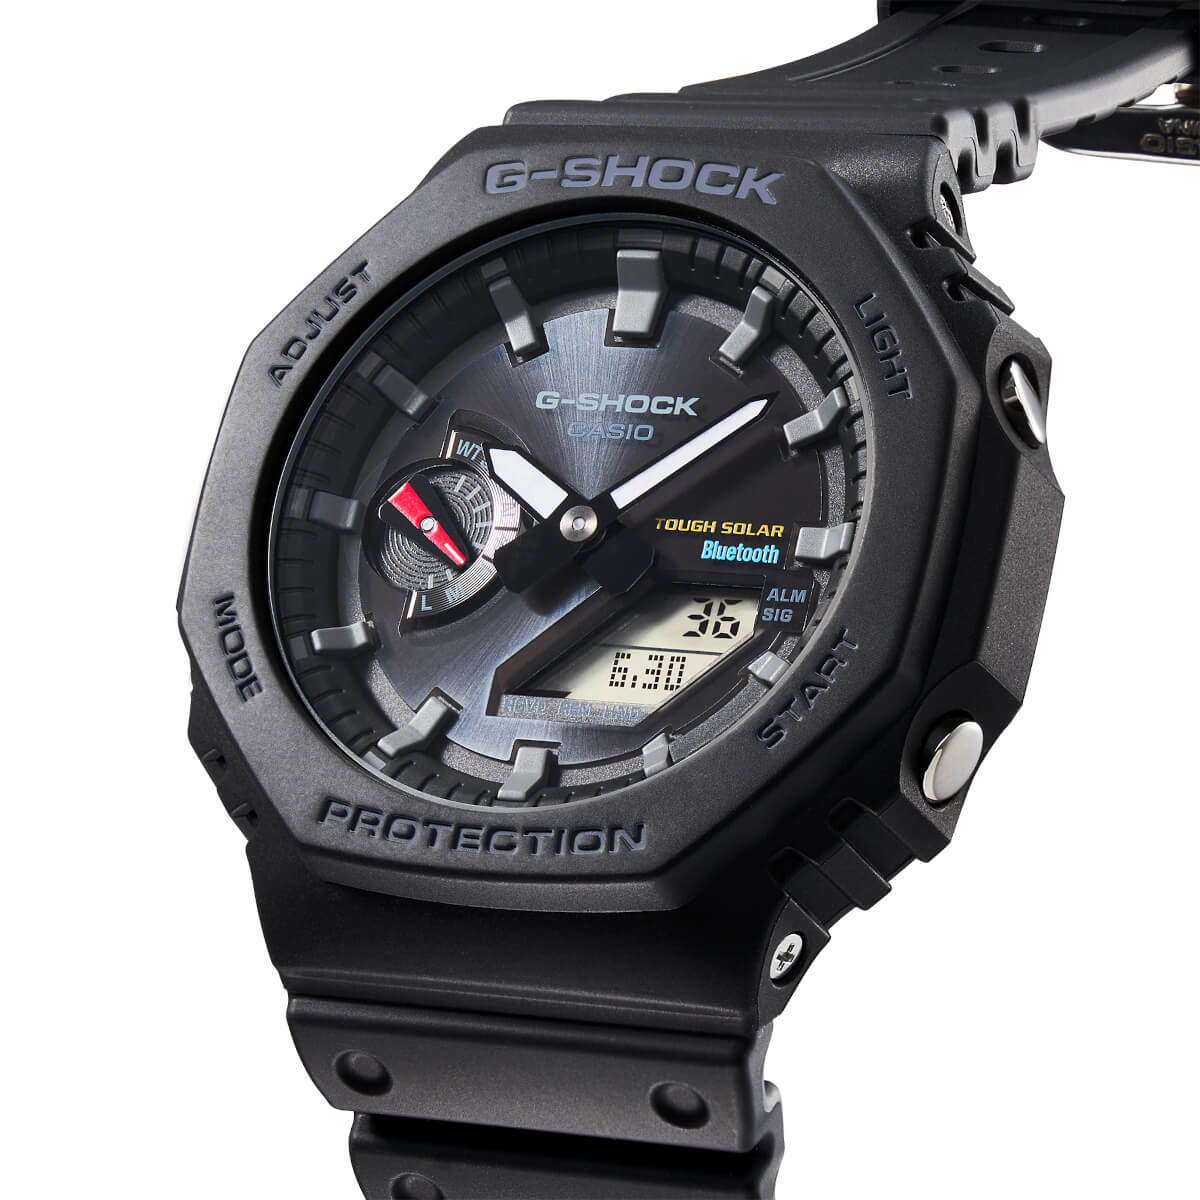 The 20 Best Casio G-Shock Watches by G-Central